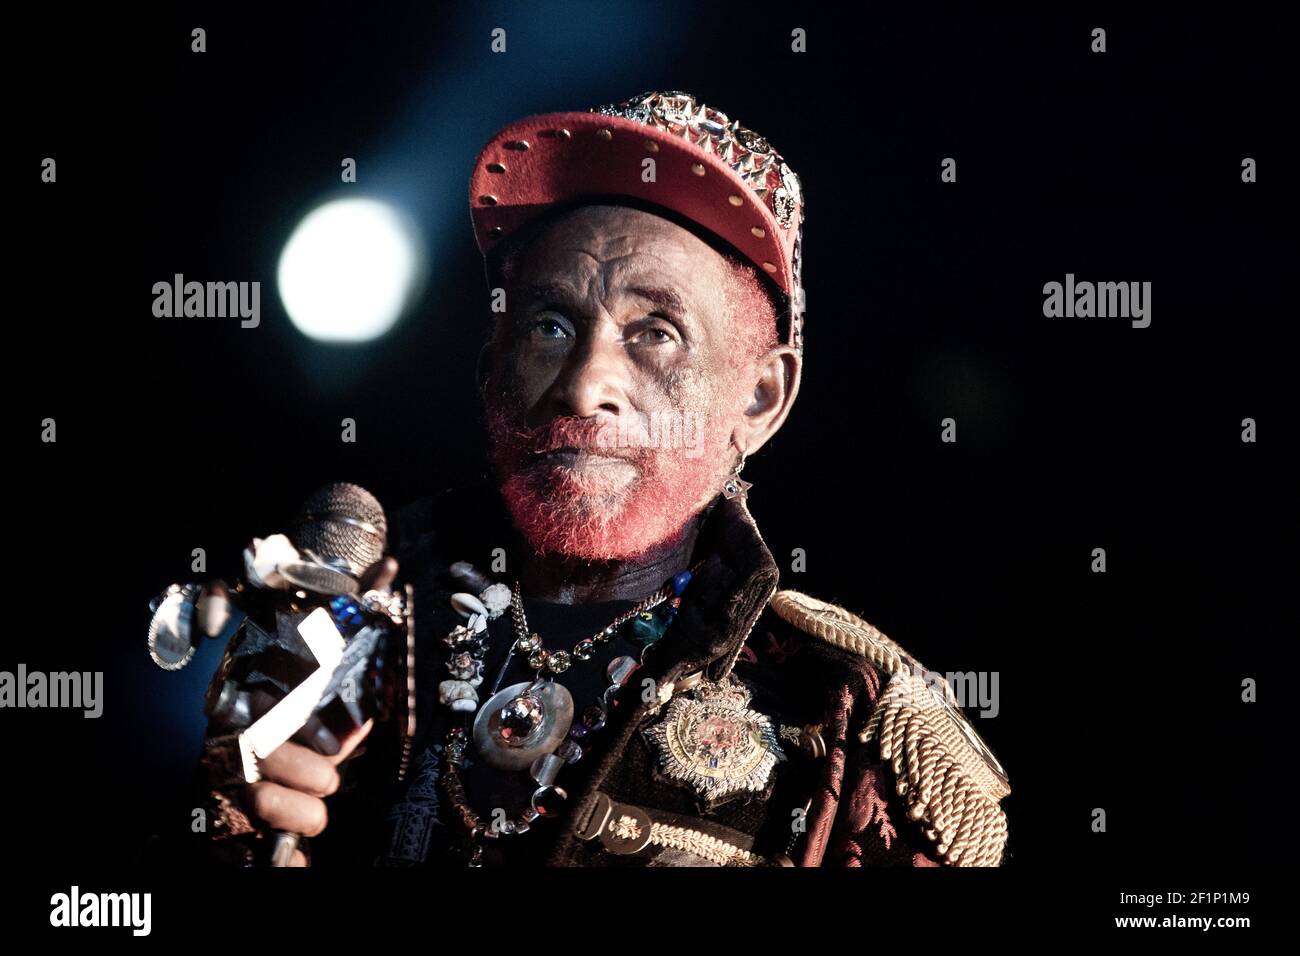 Michael Bunel / Le Pictorium -  Lee 'Scratch' Perry real name Rainford Hugh Perry -  27/07/2013  -  France  -  Lee 'Scratch' Perry (real name Rainford Hugh Perry, nicknamed among others The Neat little man, The Upsetter, Pipecock Jaxxton...) is a Jamaican producer and musician born in 1936. His works, his techniques, the sound he was able to obtain from his studio (with a simple 4-track at the beginning) as well as his various collaborations with all the gotha of the island have made him a pillar of the Jamaican sound, from ska to reggae, a style that he has left his mark. July 27th, 2013 Stock Photo